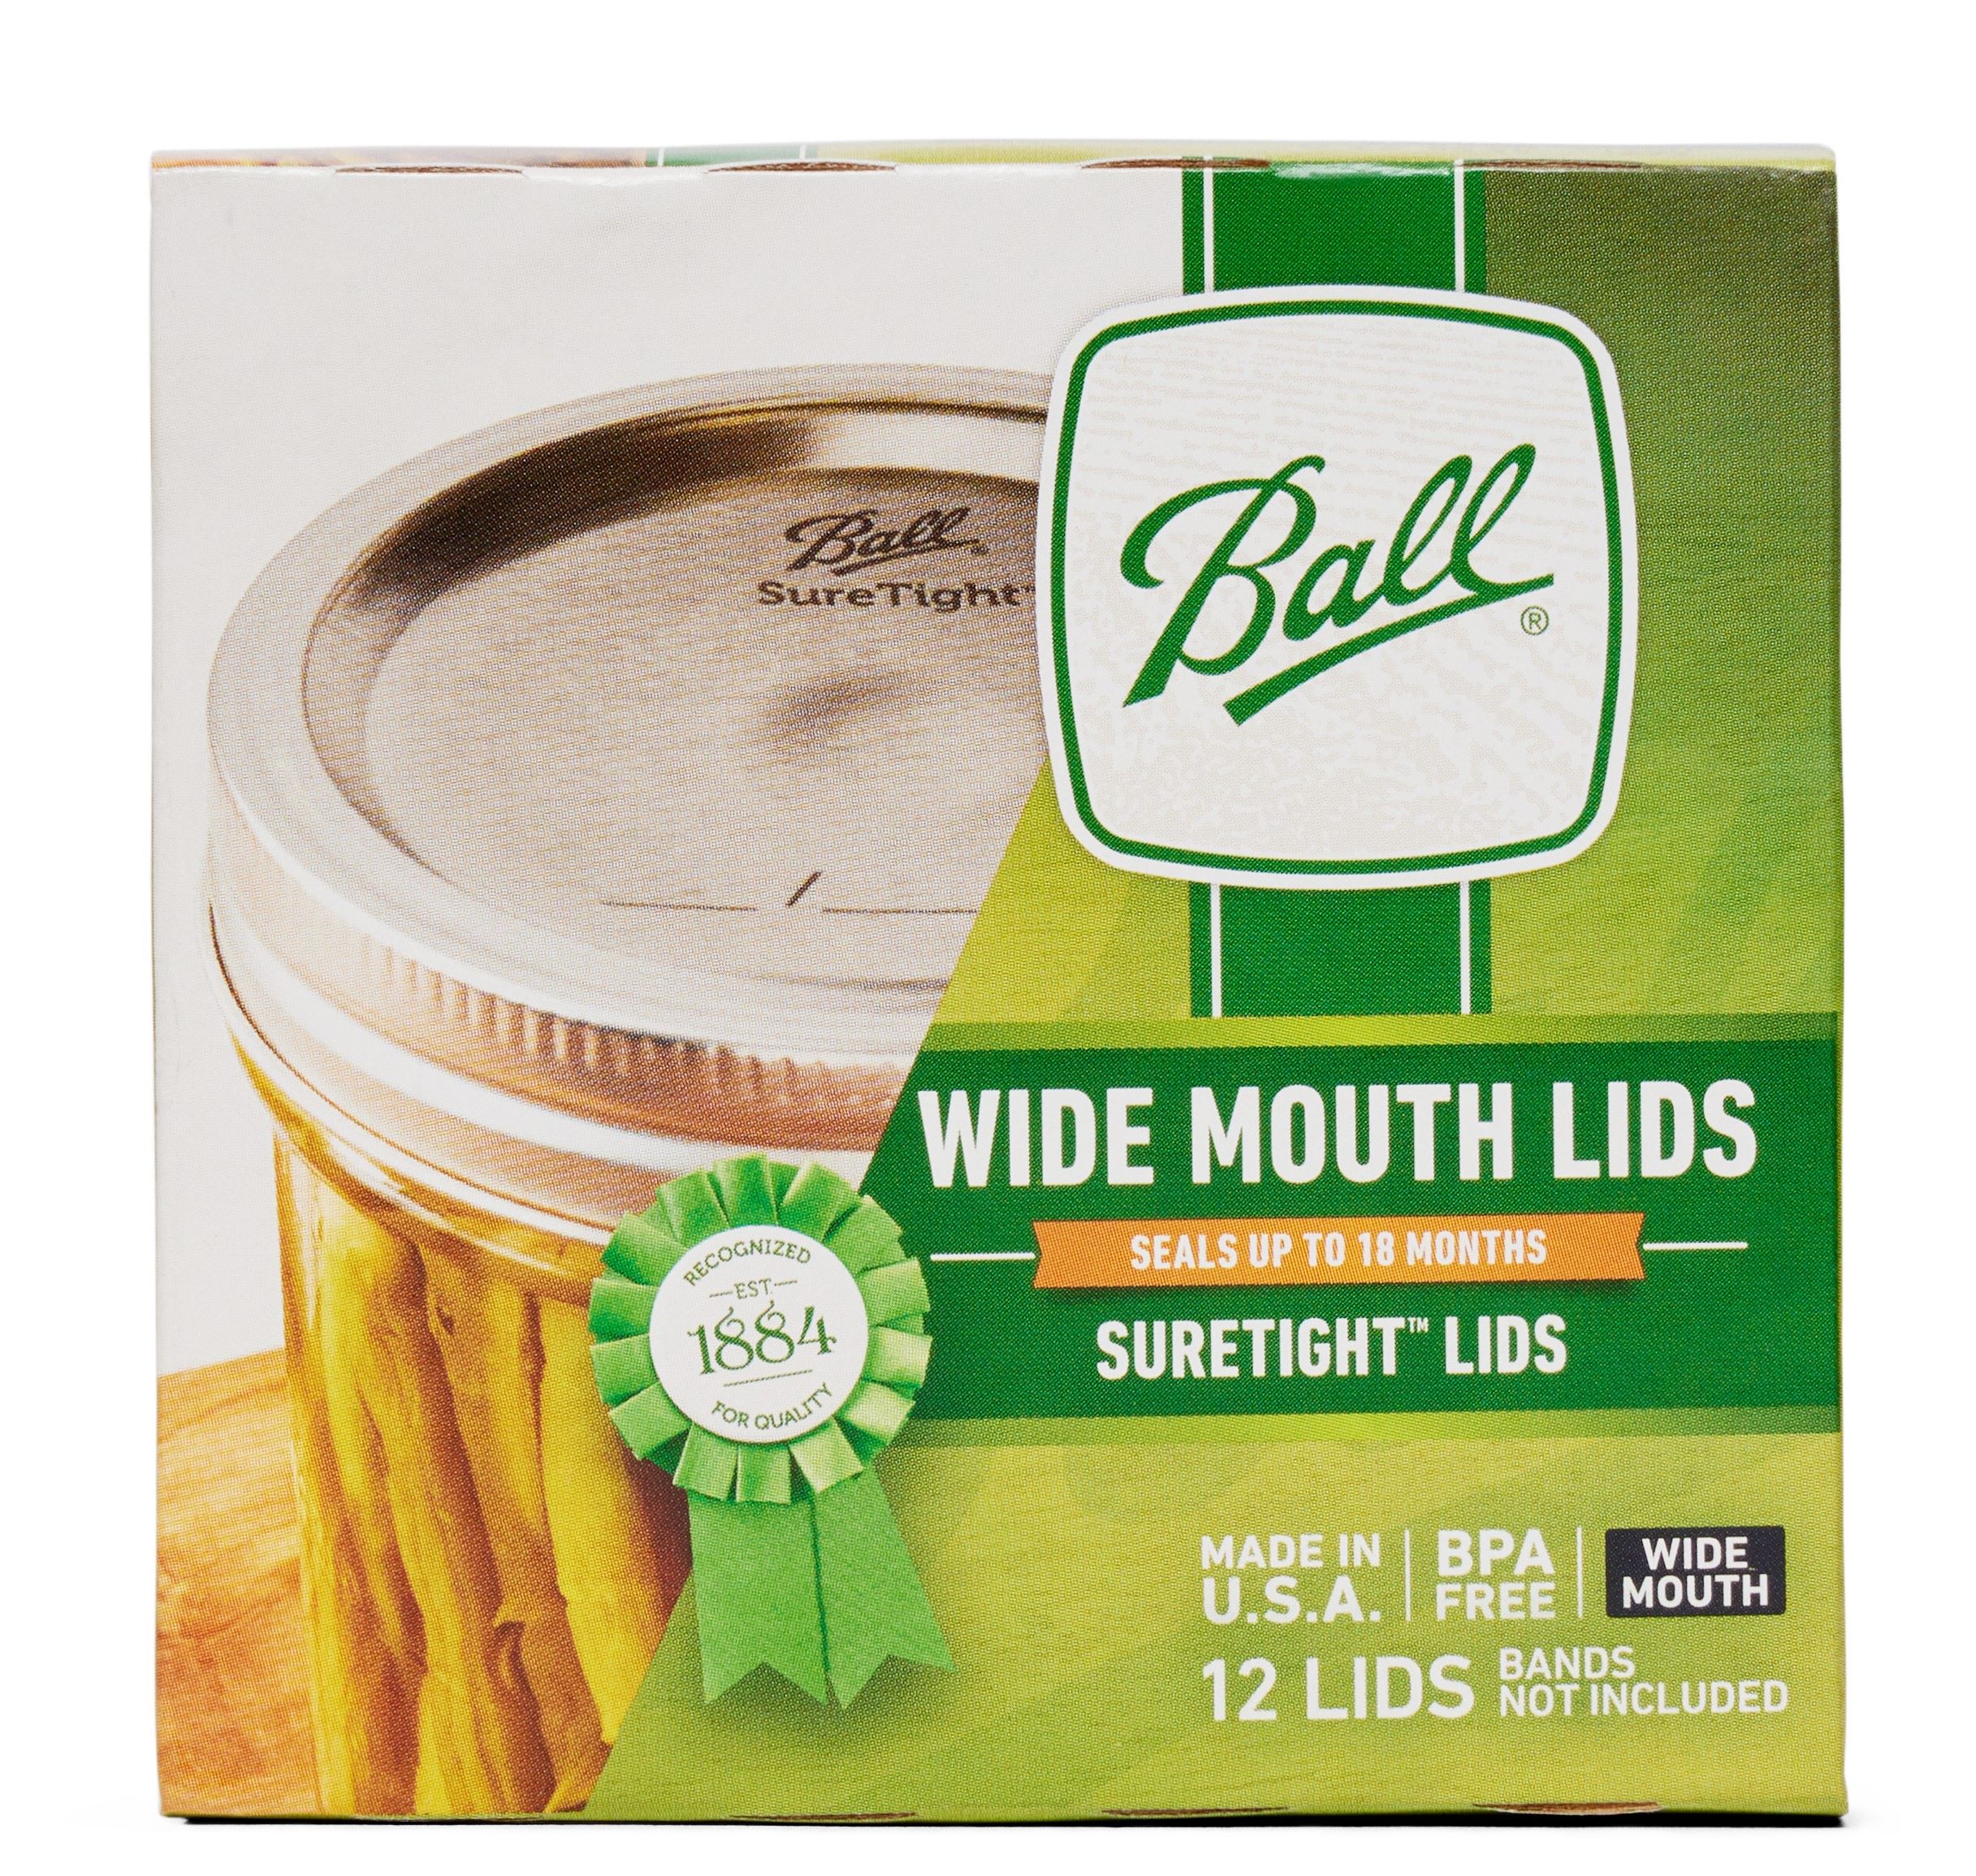 Ball Wide Mouth Lids, 12 Count, (Bands Not Included) - image 1 of 7